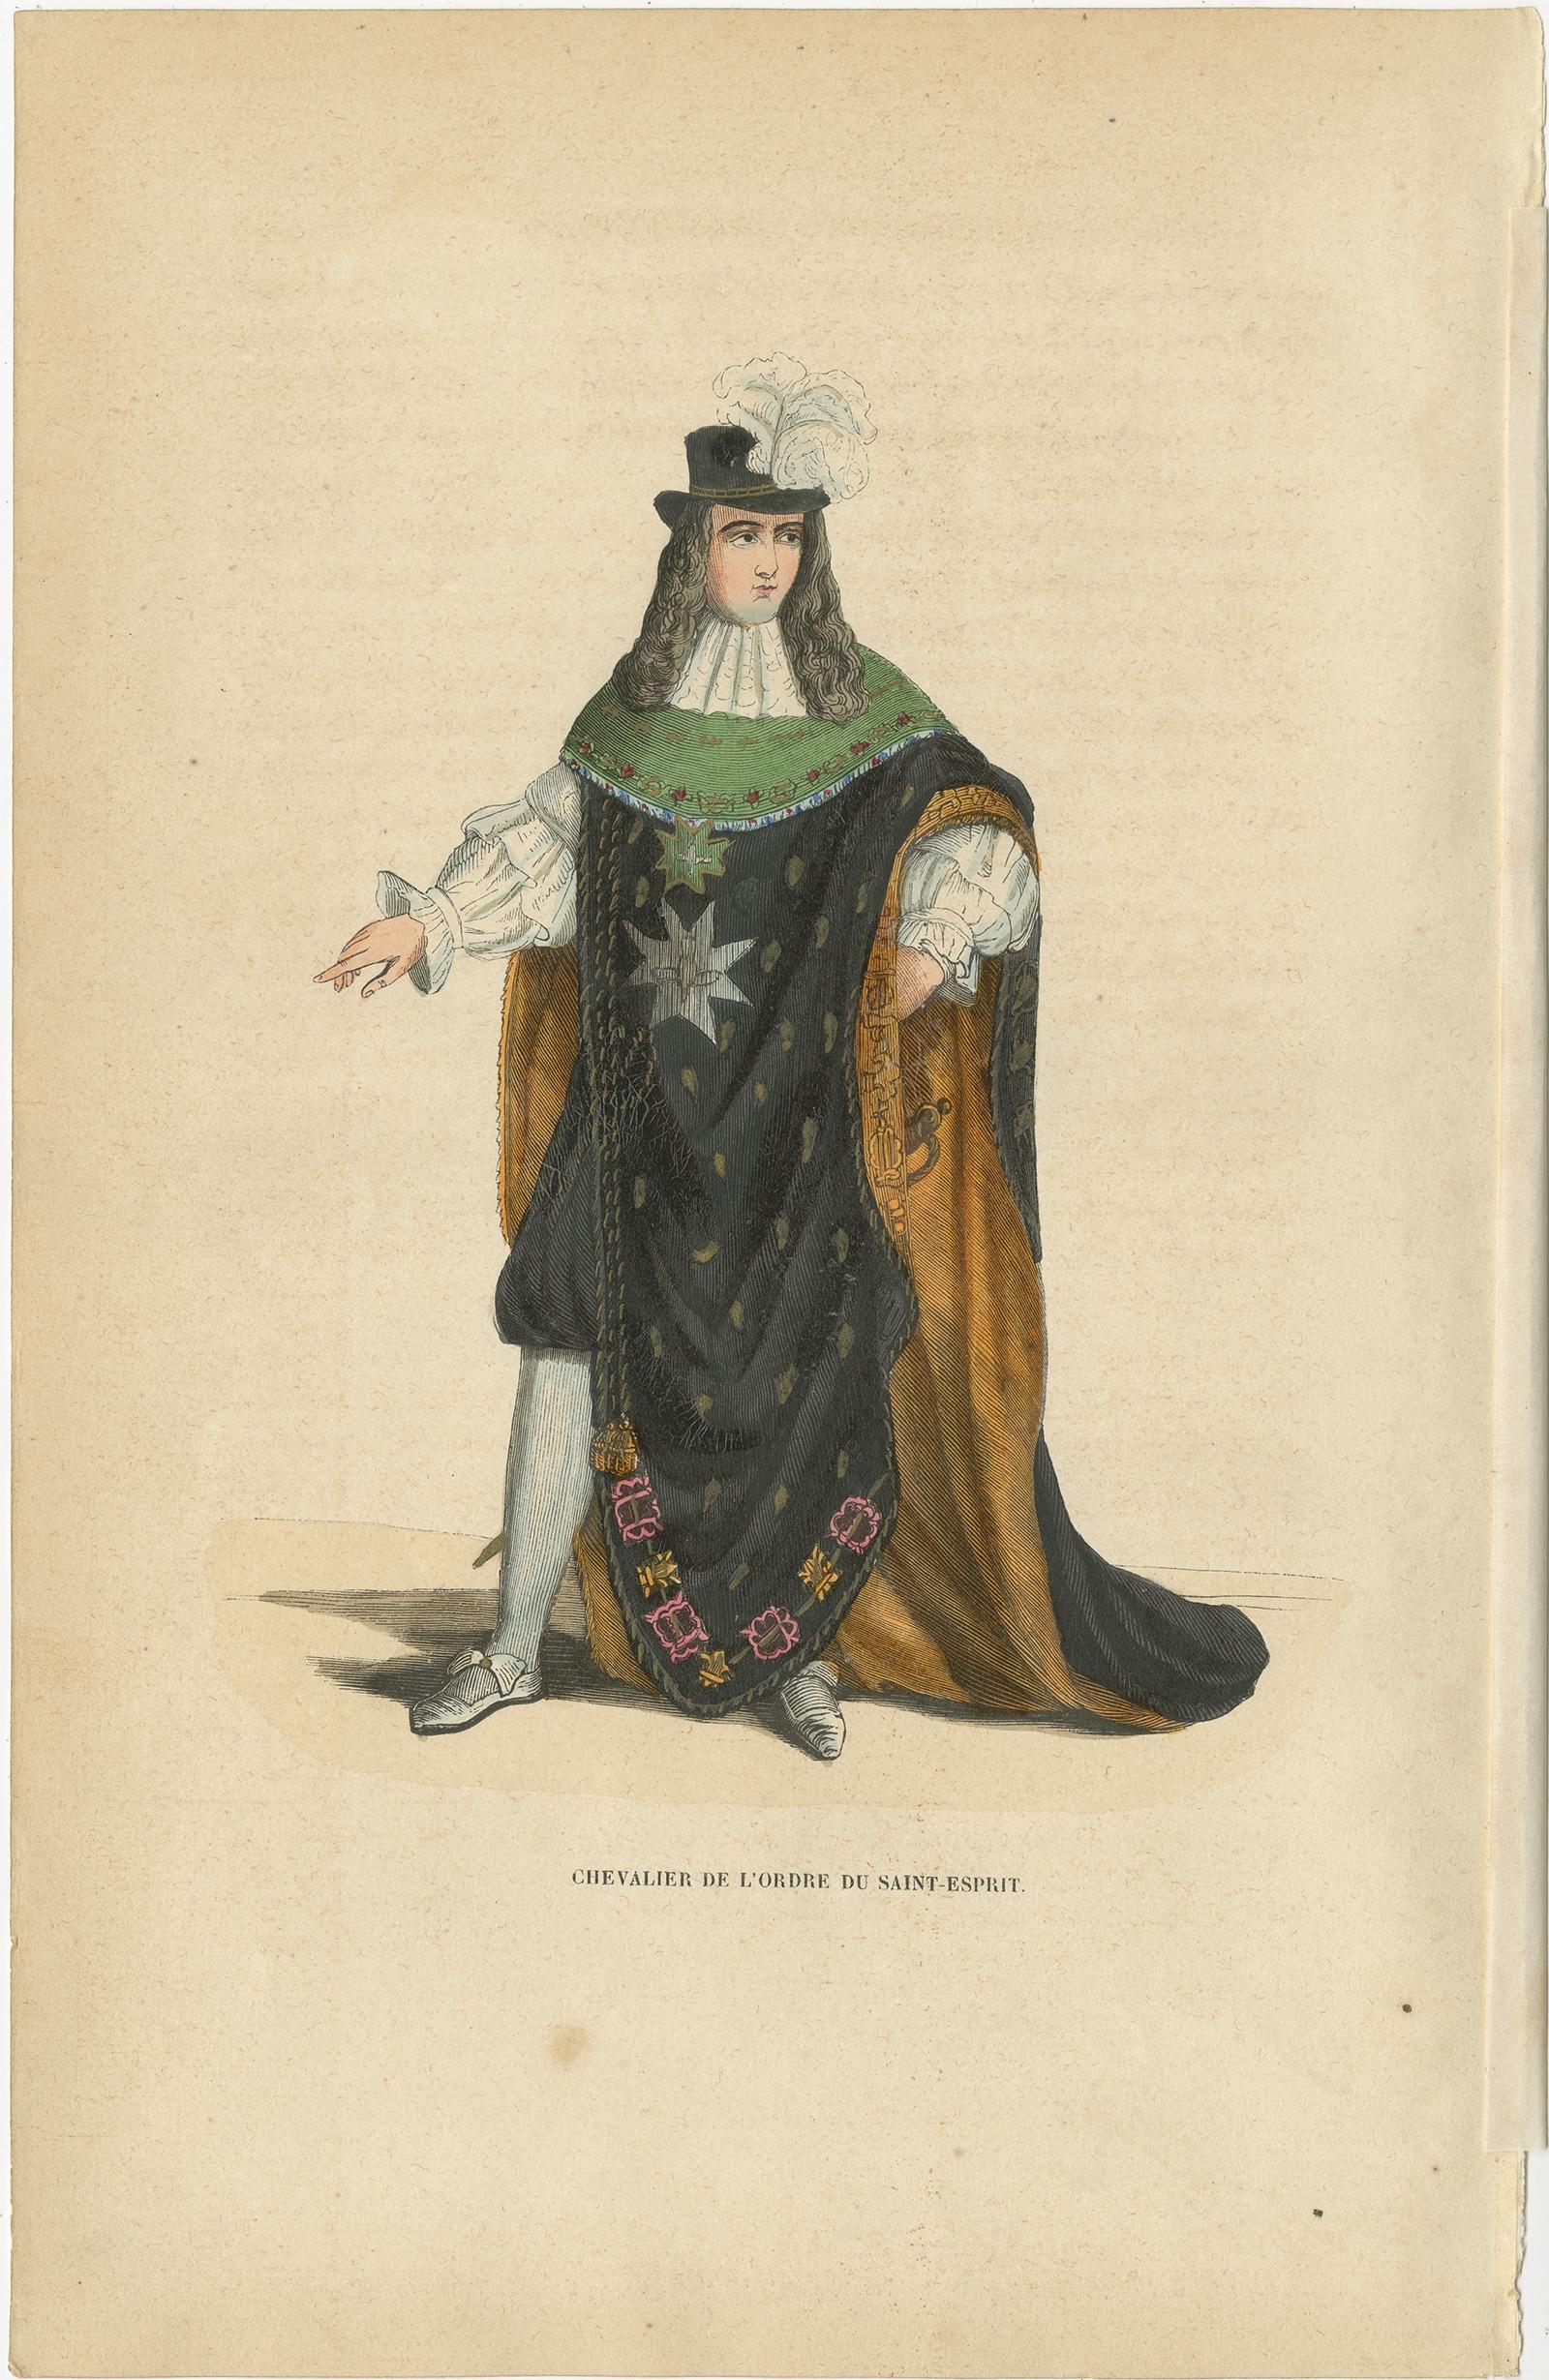 Antique print titled 'Chevalier de l'Ordre du Saint-Esprit'. 

Print of a Knight of the Order of the Holy Spirit in ceremonial robes, French order of chivalry. This print originates from 'Histoire et Costumes des Ordres Religieux'.

Artists and